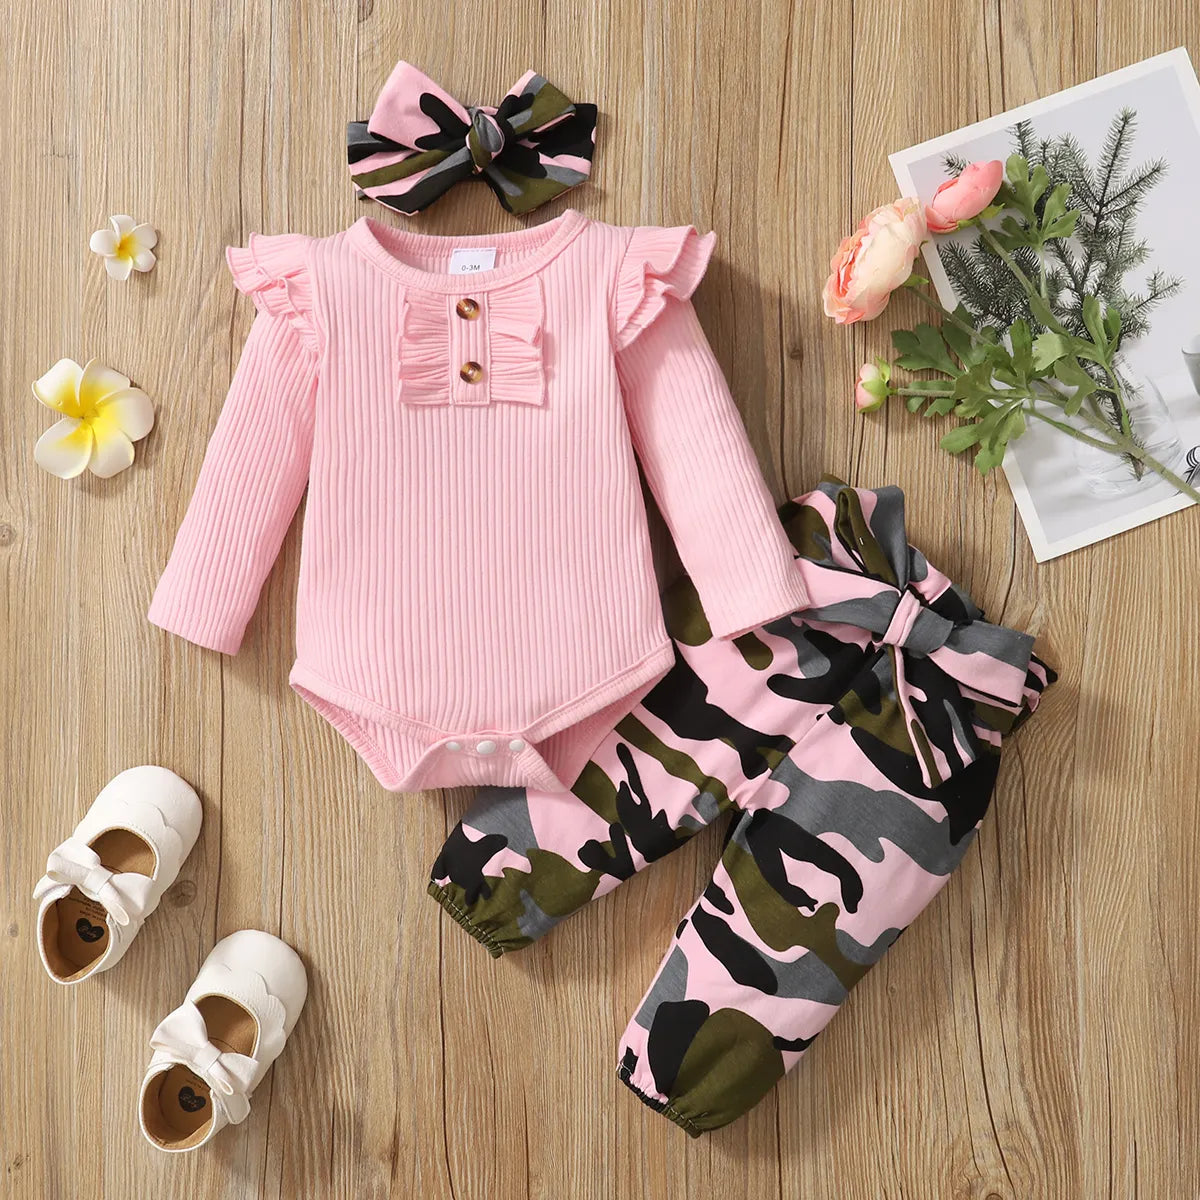 Newborn Baby Girl Clothes Set | Long Sleeve Bodysuit + Camouflage Pants + Headband | Cotton Clothing Suit | Ages 0-18 Months